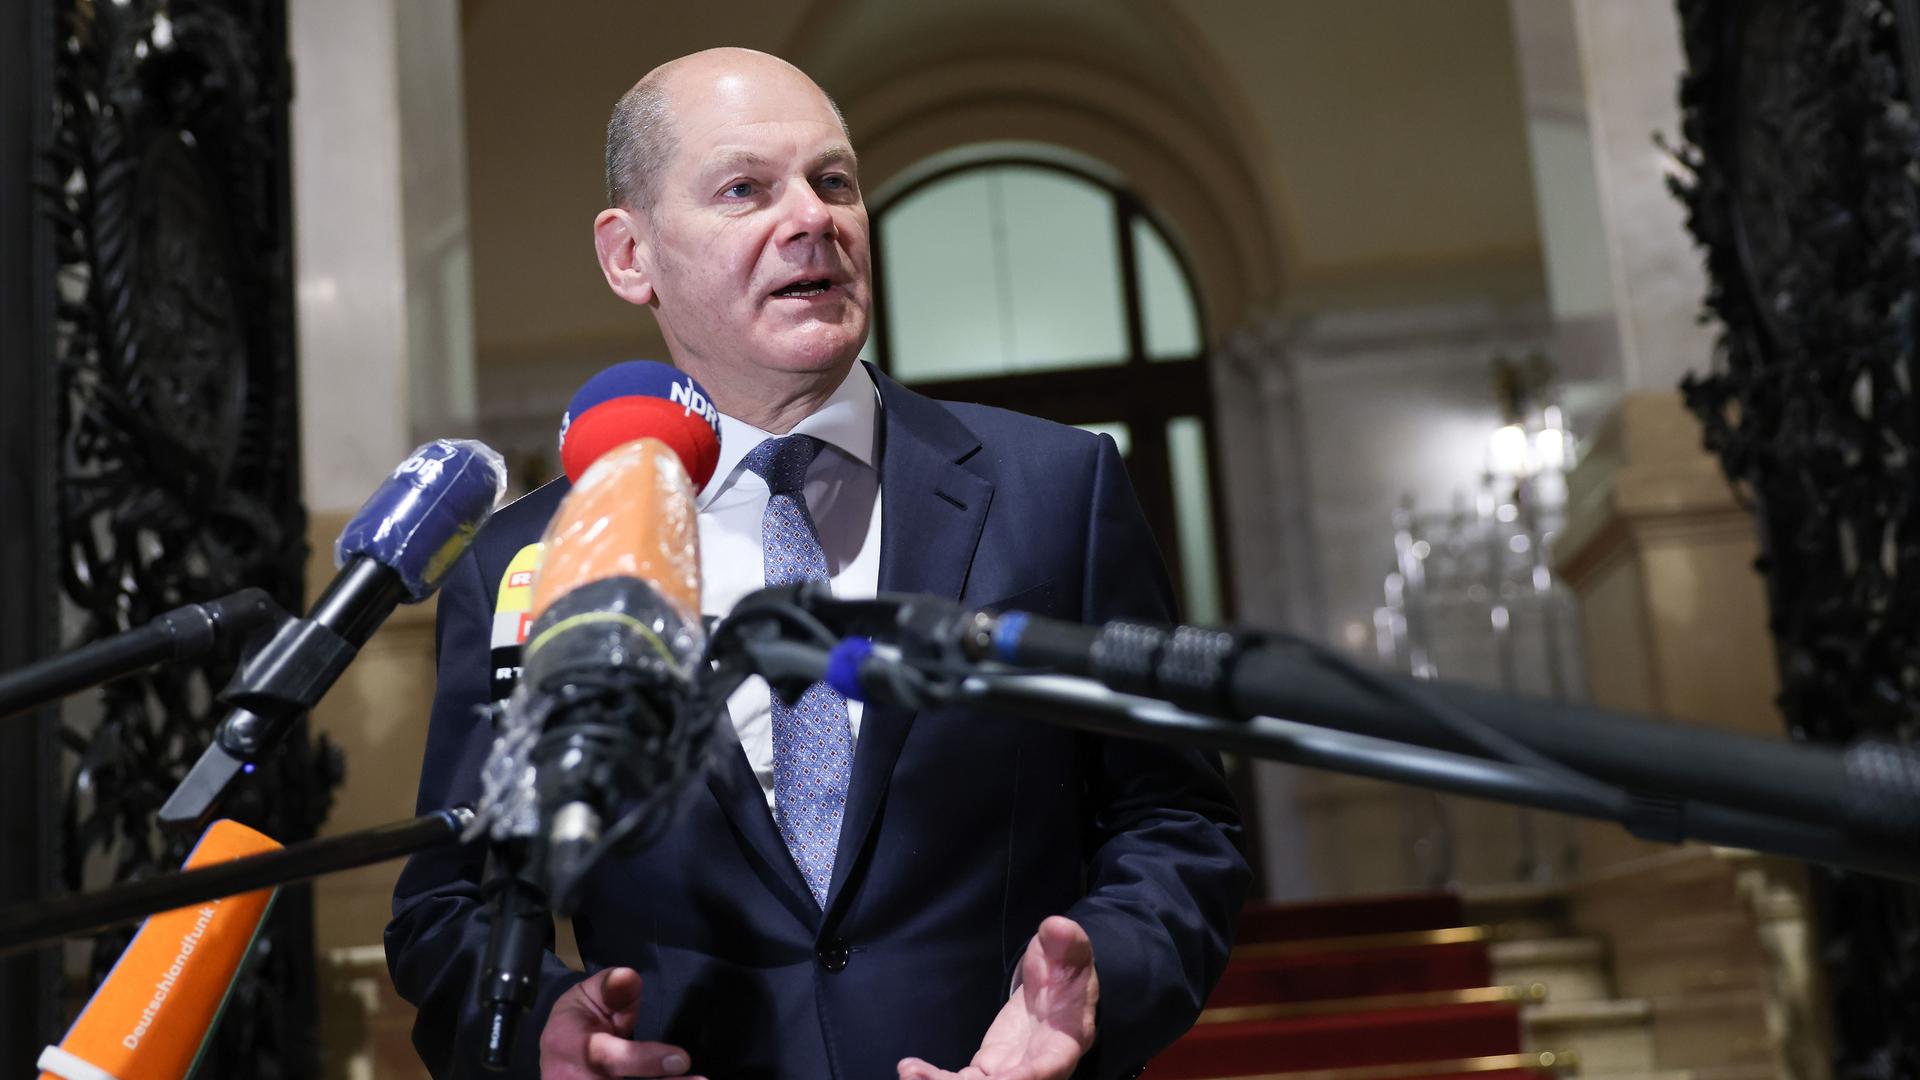 German Finance Minister Olaf Scholz expressed confidence that an accord will be reached